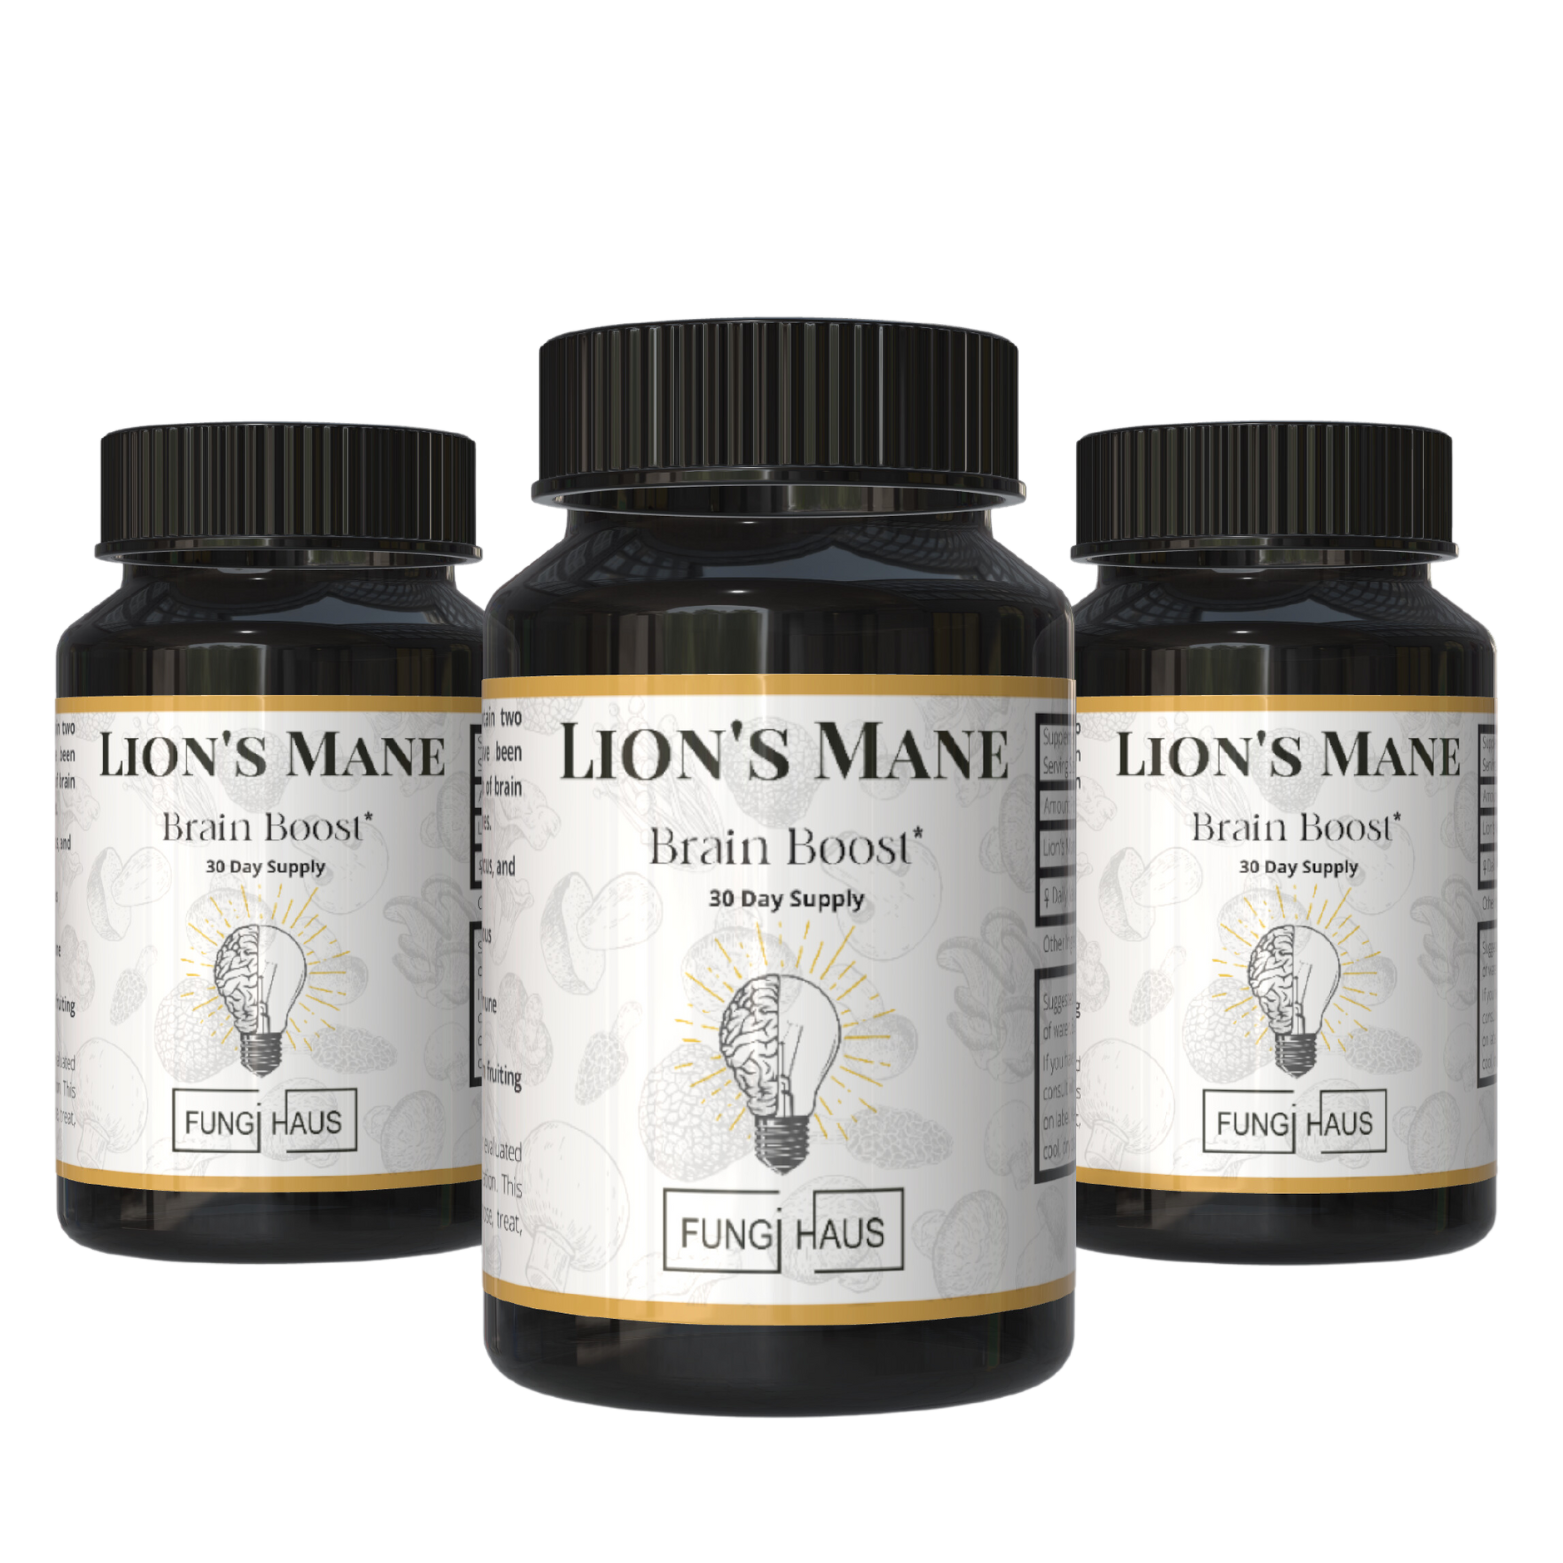 Lion's Mane Brain Boost* - 30 Day Supply - Capsules